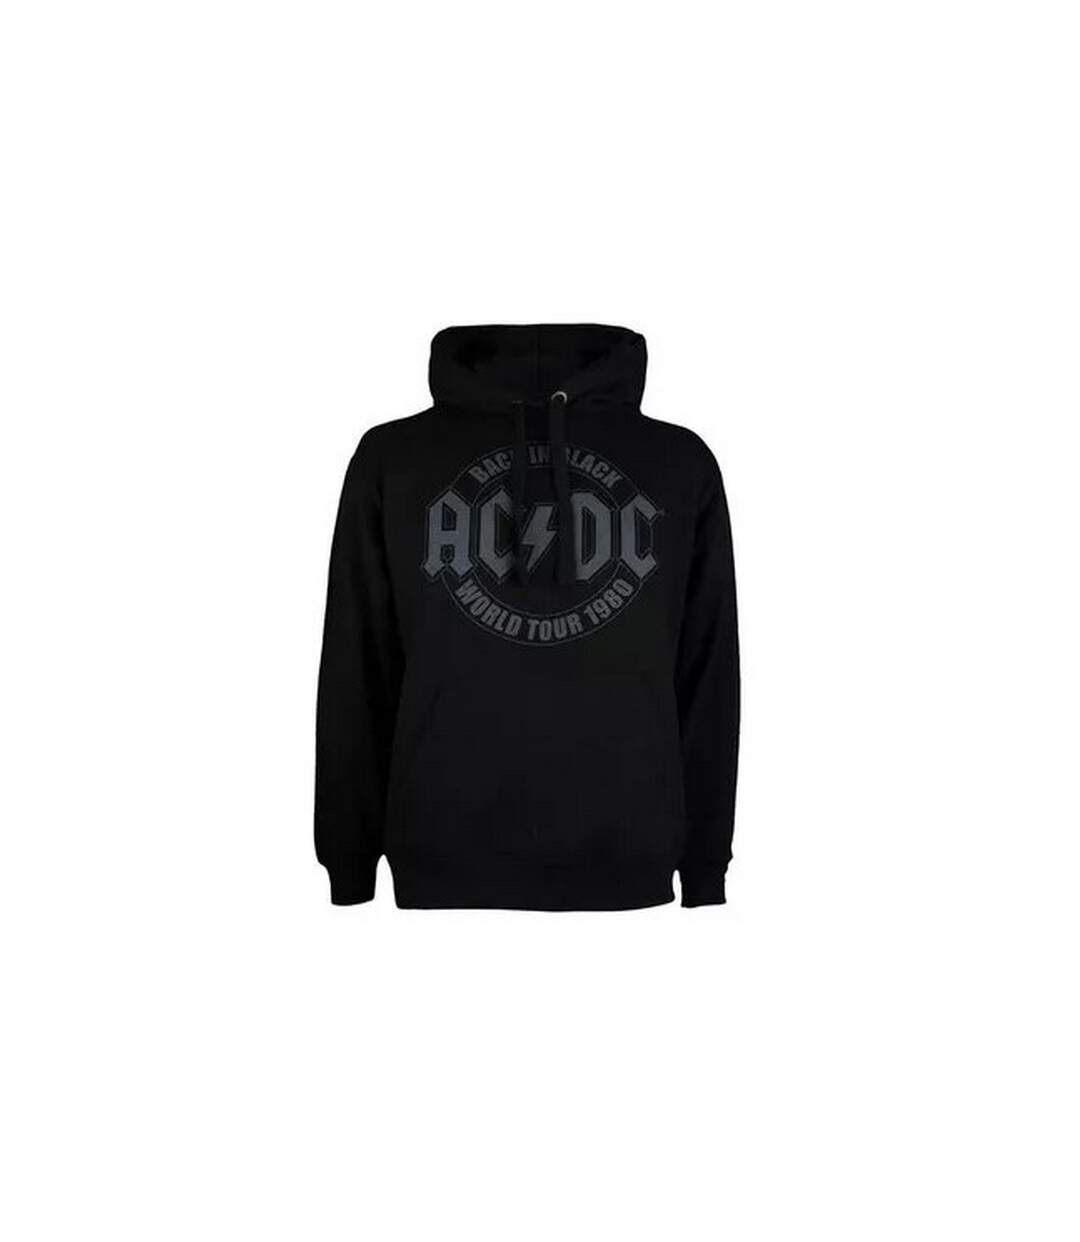 AC/DC - Sweat à capuche HIGHWAY TO HELL - Homme (Noir) - UTTV283